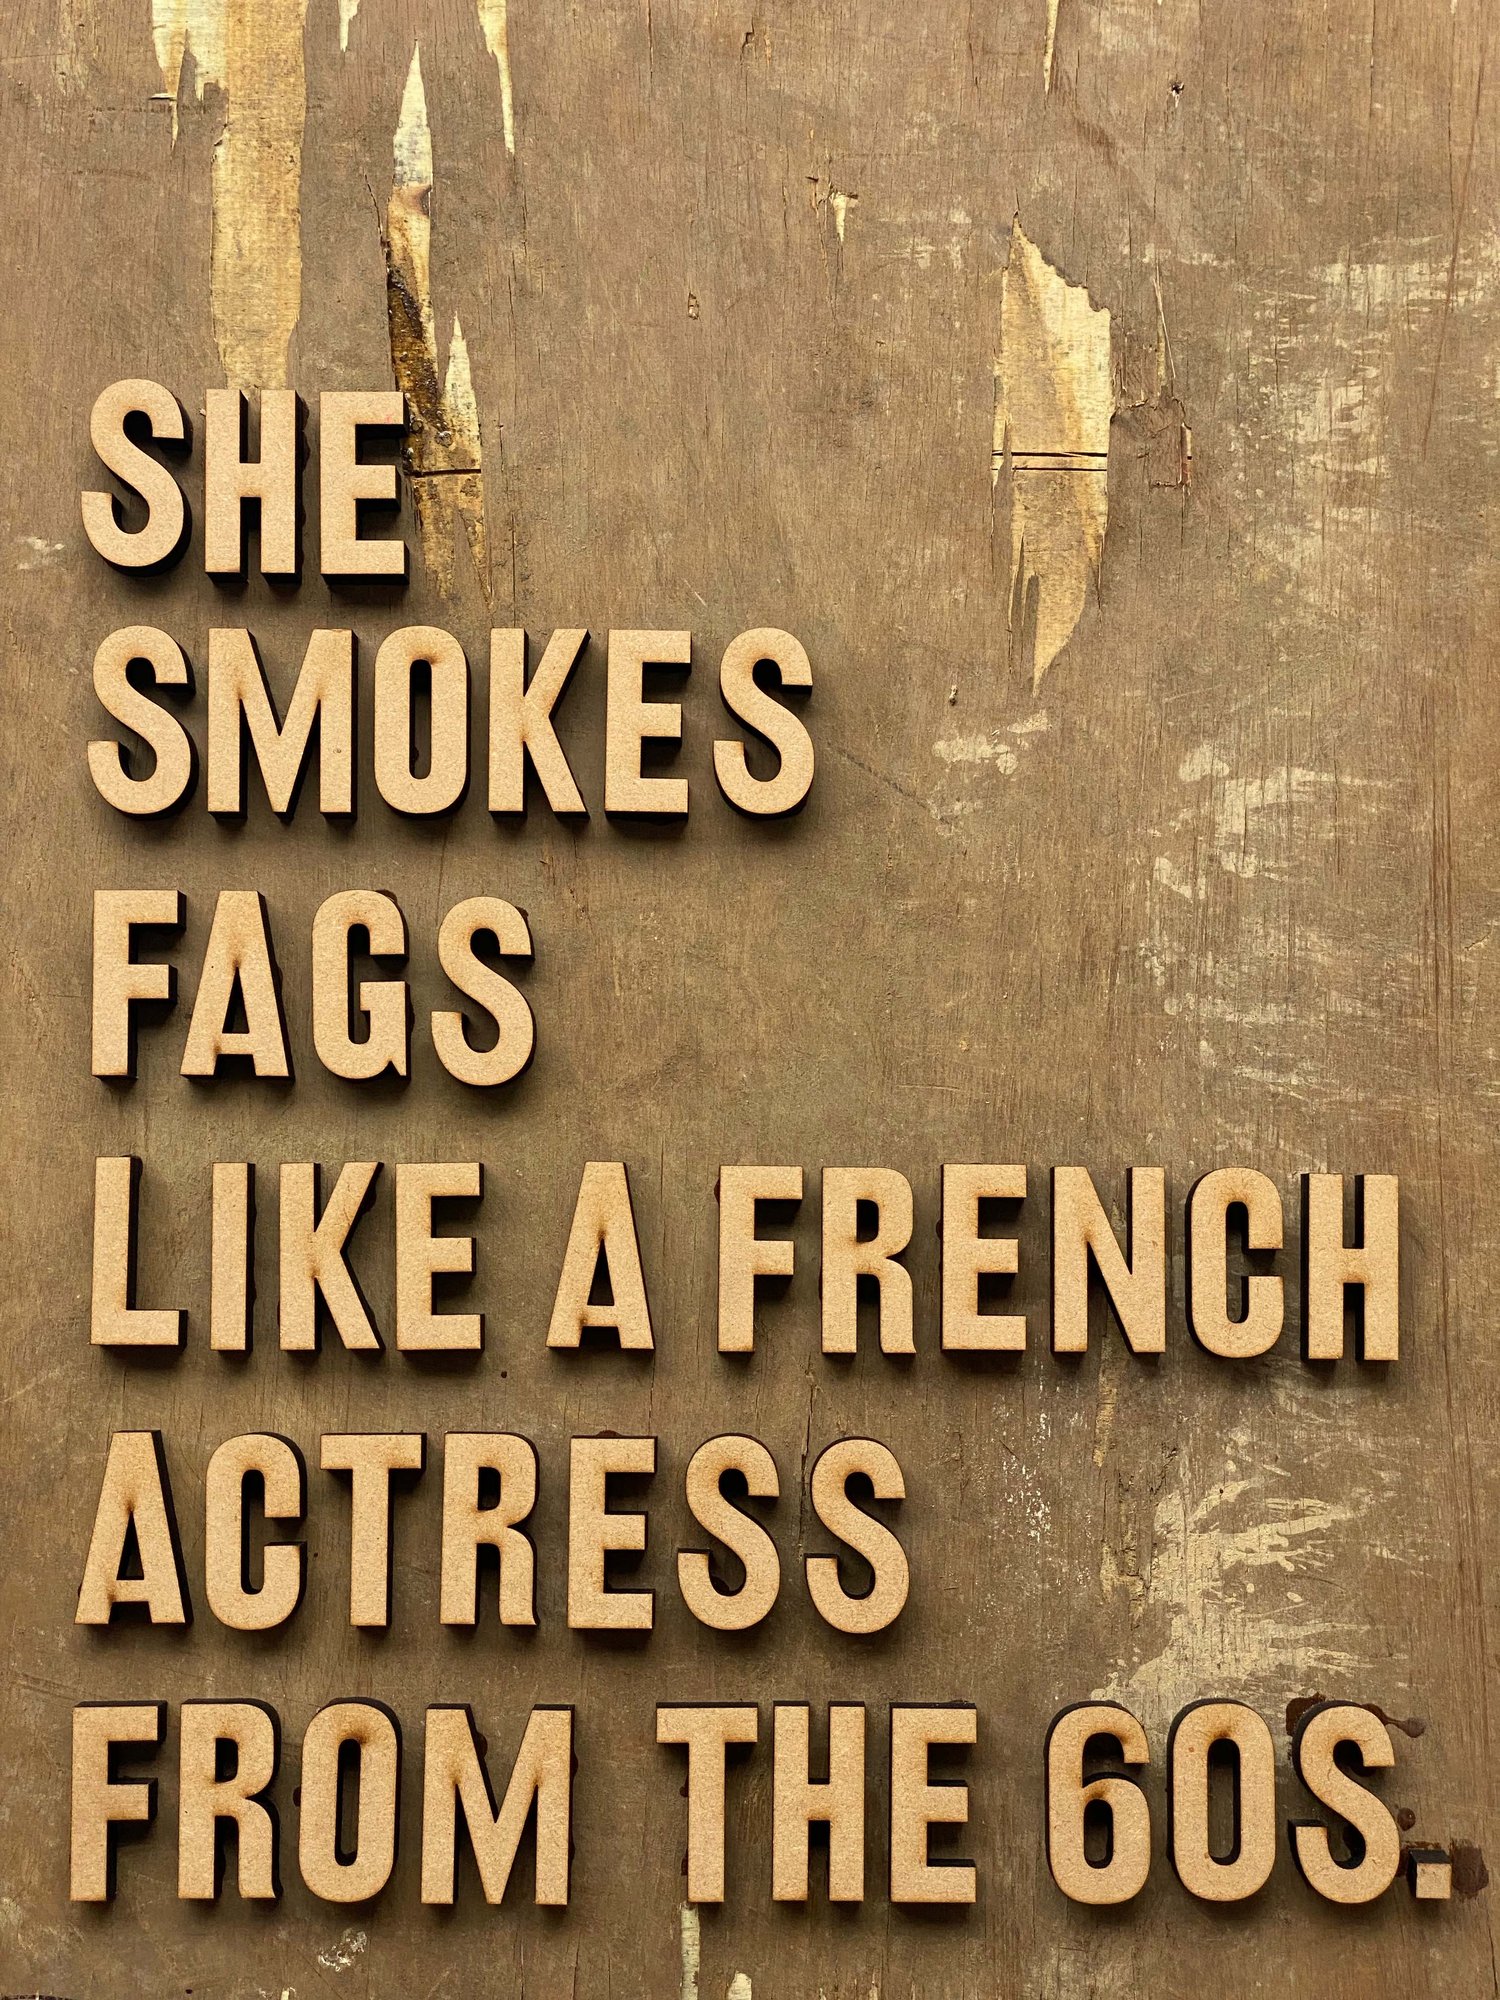 Image of 'She smokes fags like a french actress from the 60's.'  by Hackney Dave